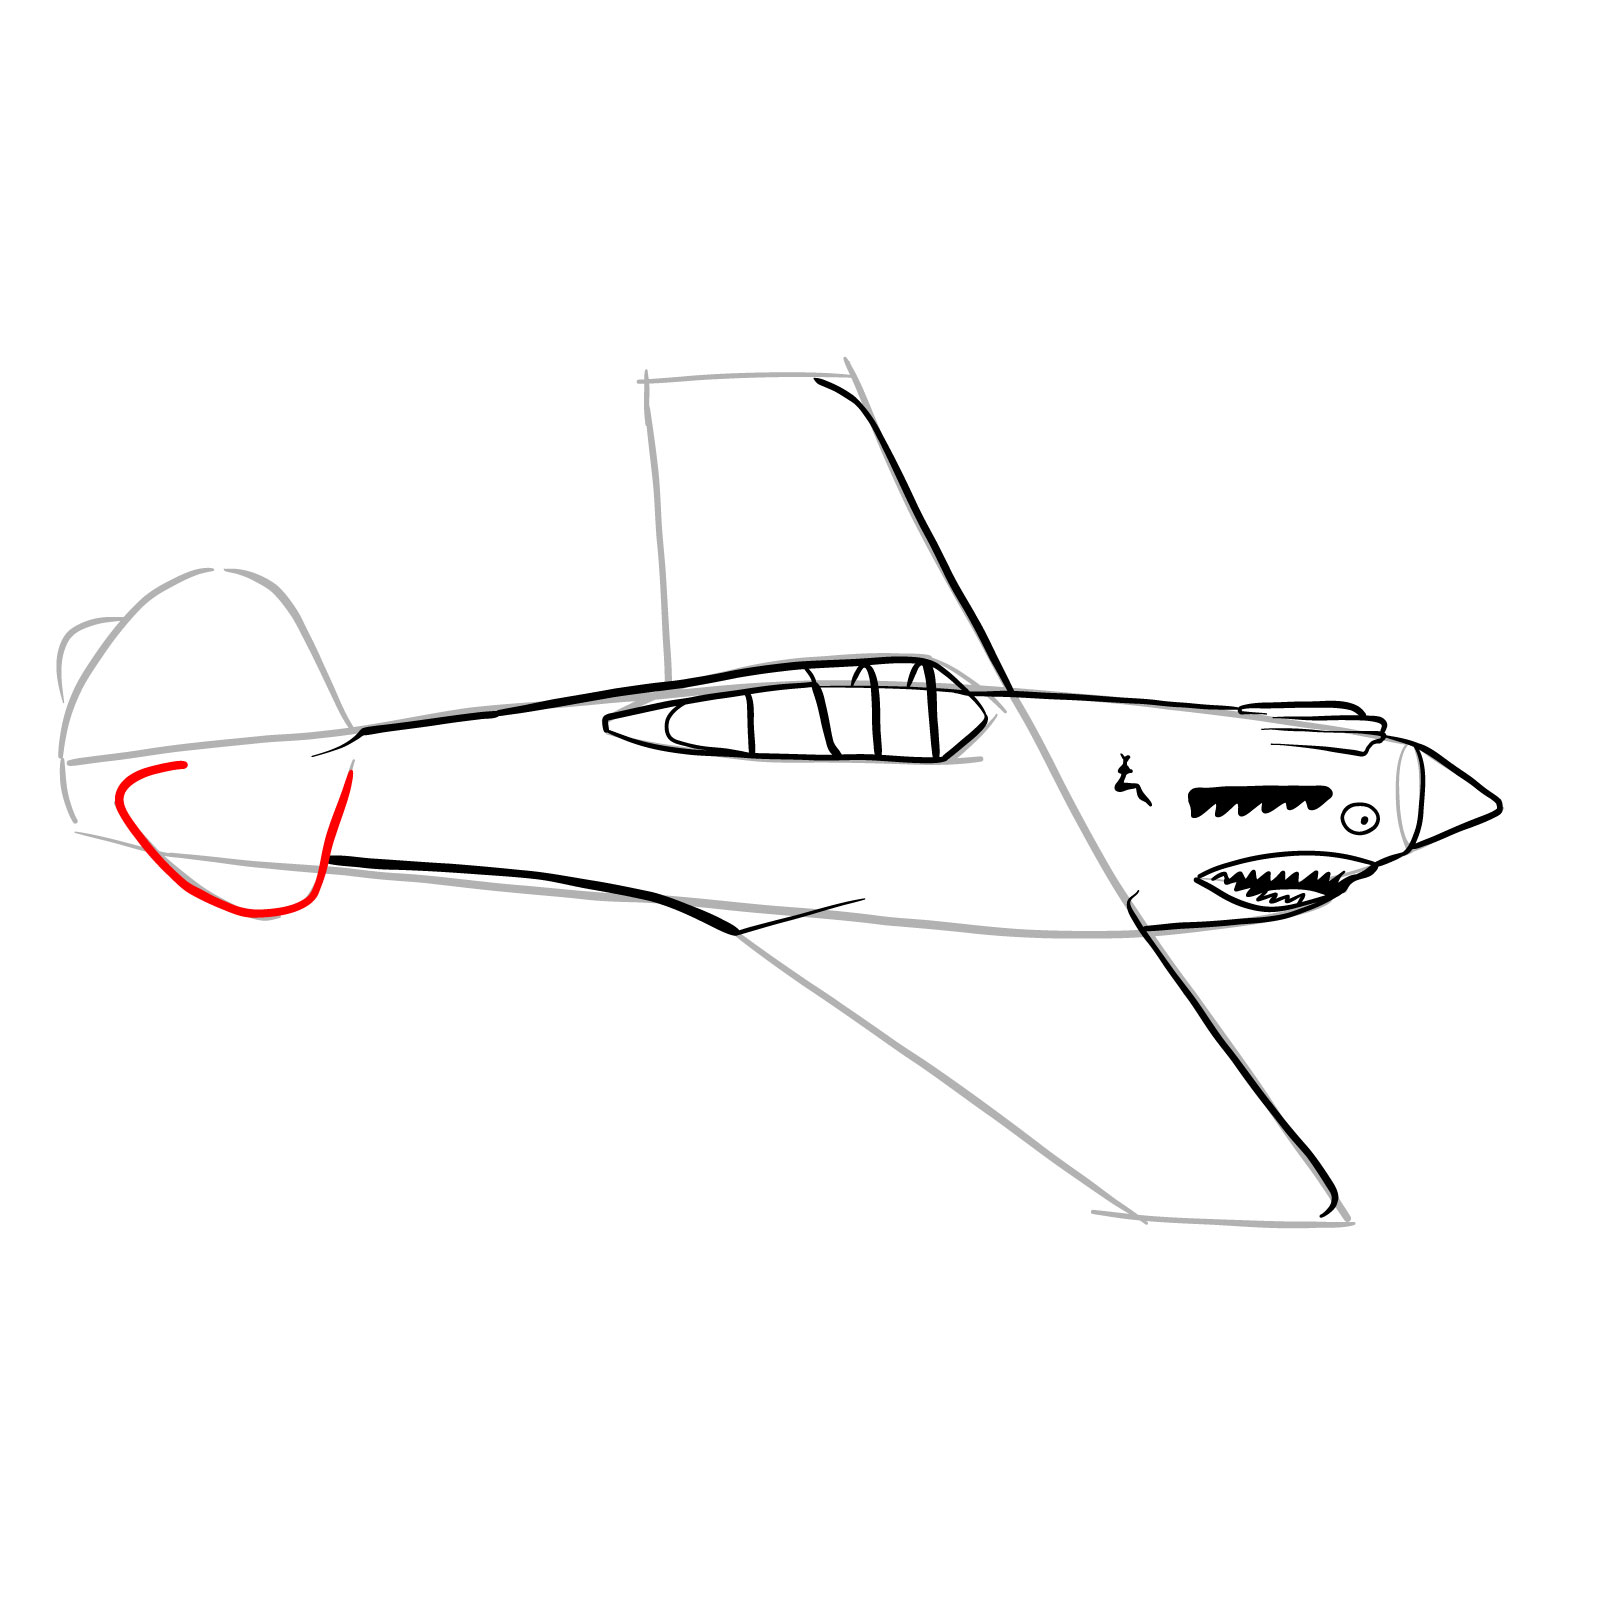 How to draw a P-40 Flying Tiger - step 17